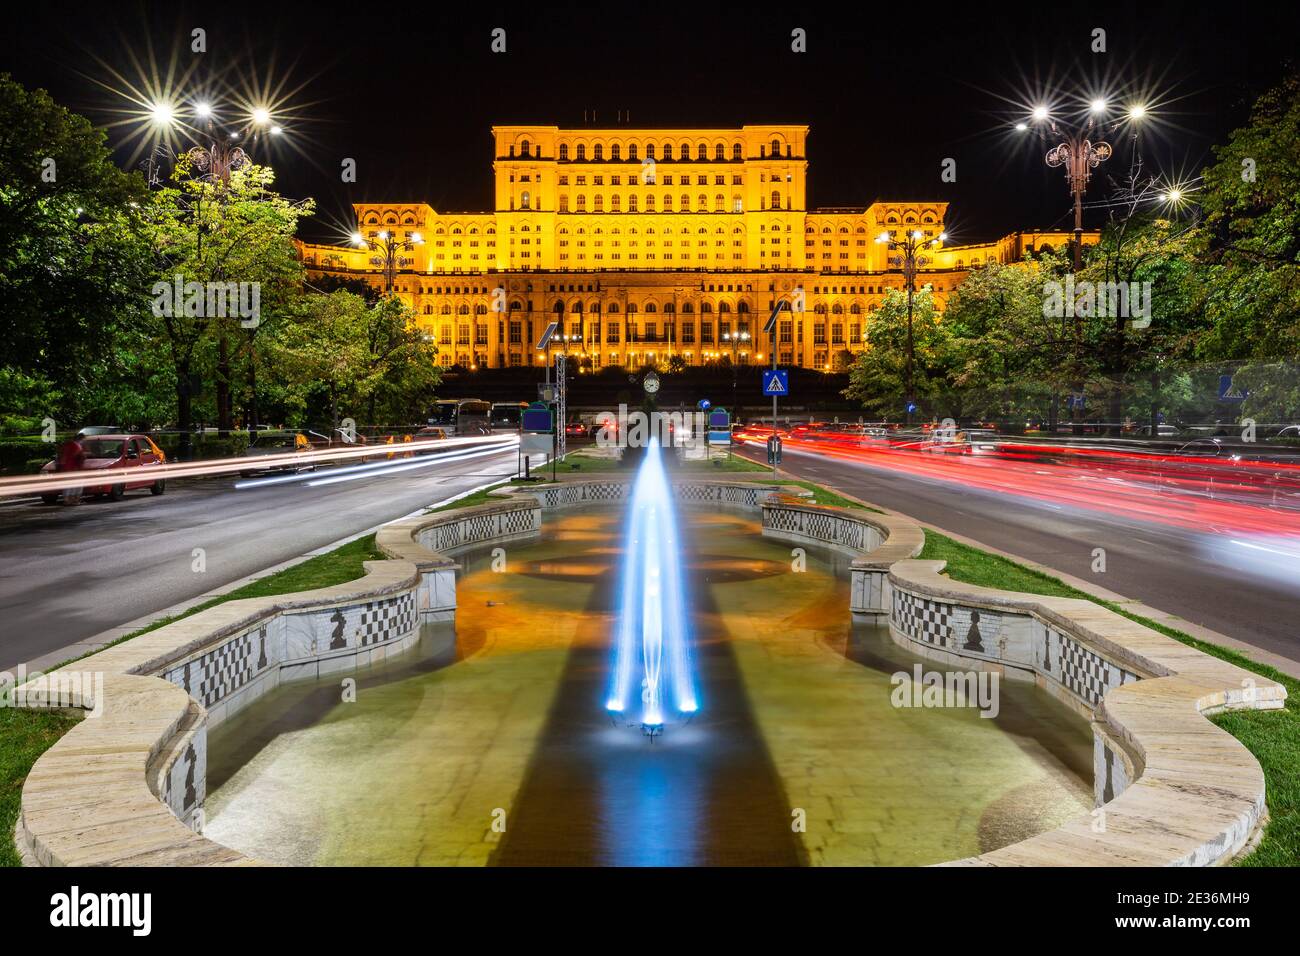 The Palace of the Parliament in Bucharest, Romania. Stock Photo